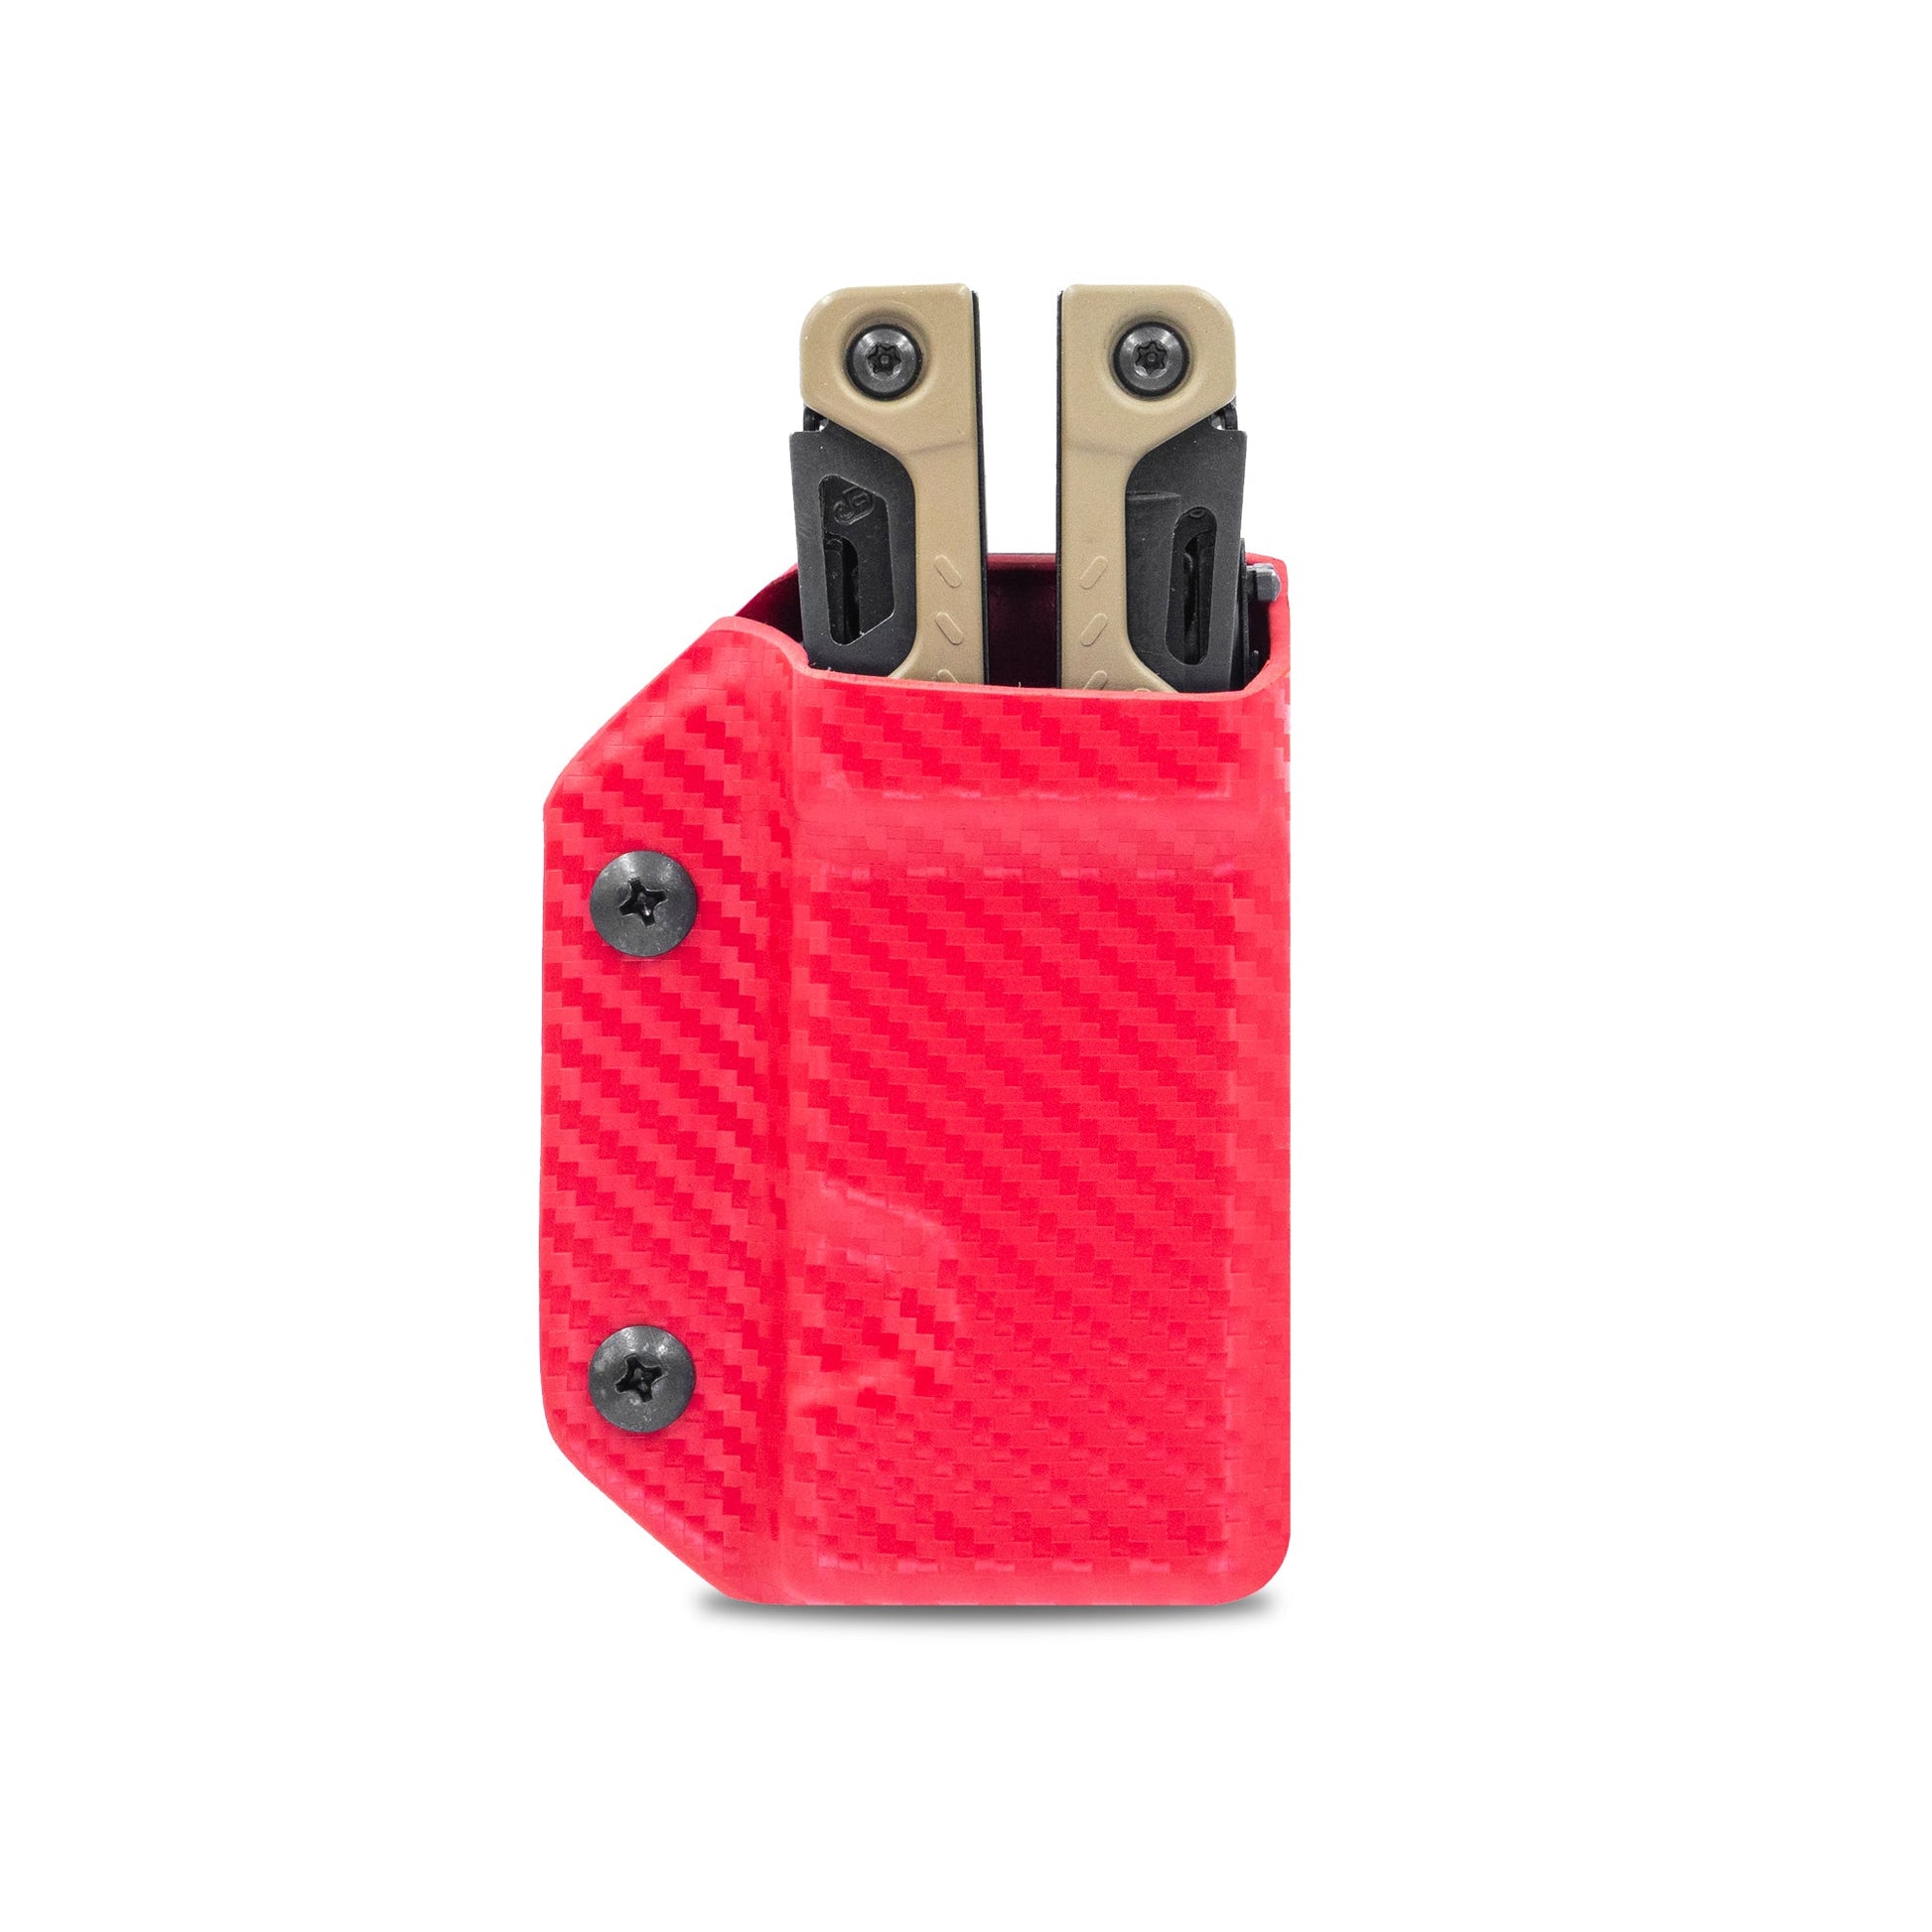 Kydex Sheath for Leatherman OHT Clip & Carry